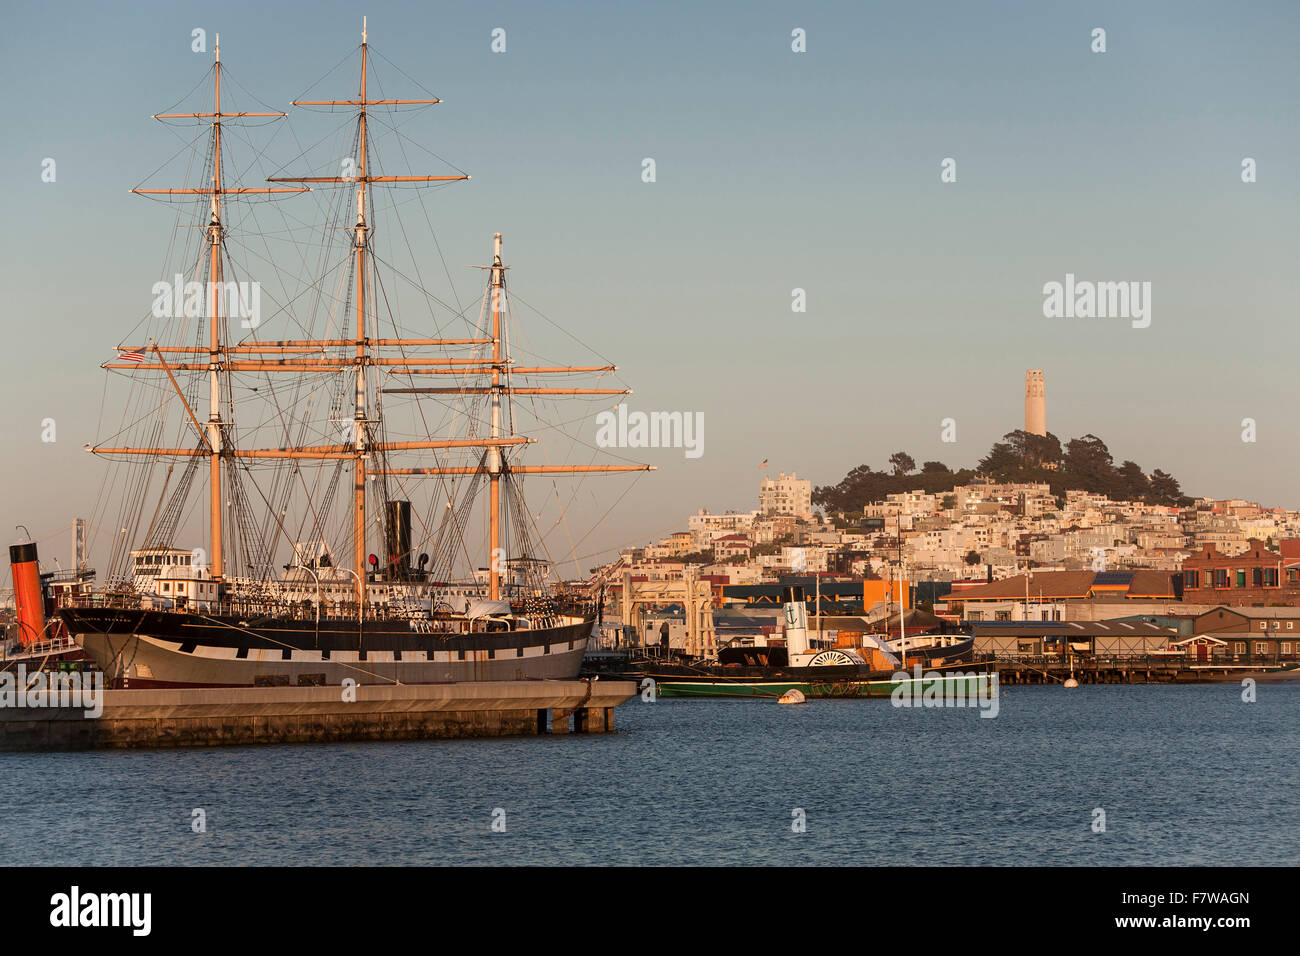 United States, California , San Francisco, The square rigged sailing ship 'Balcutha', Coit Tower on top of Telegraph Hill Stock Photo